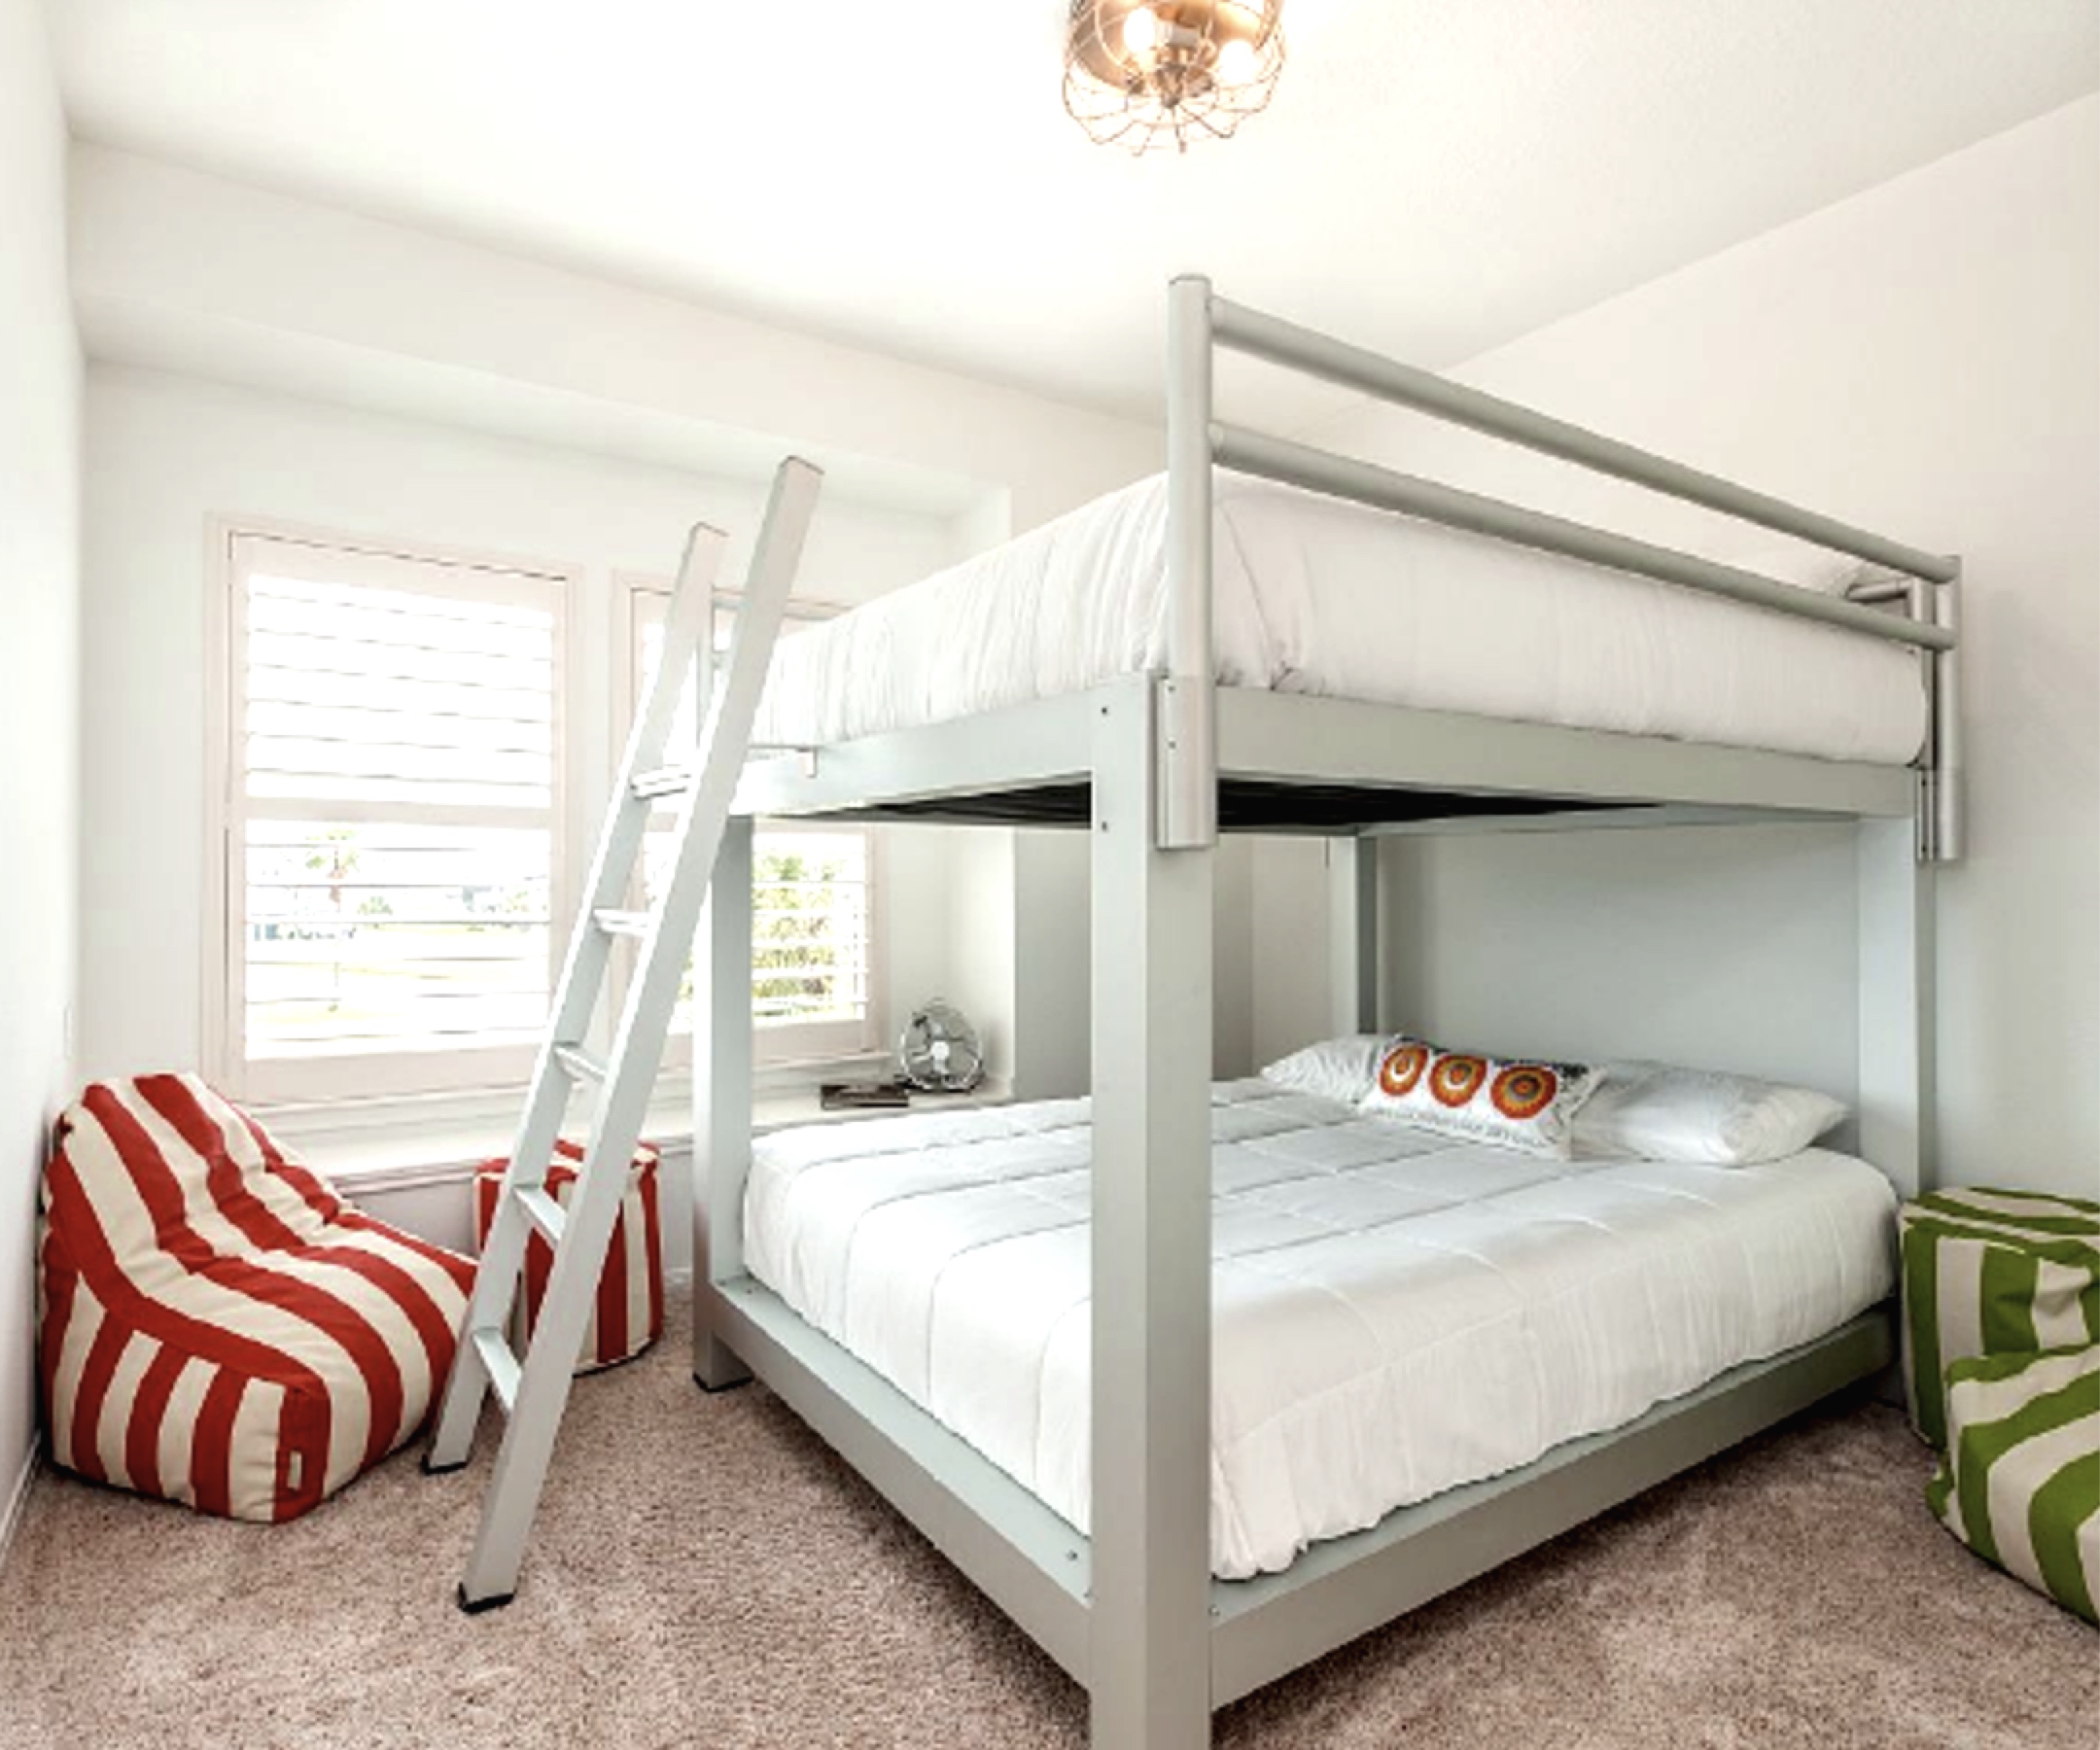 Bunk Bed Ideas For A Small Space, Small Size Bunk Beds